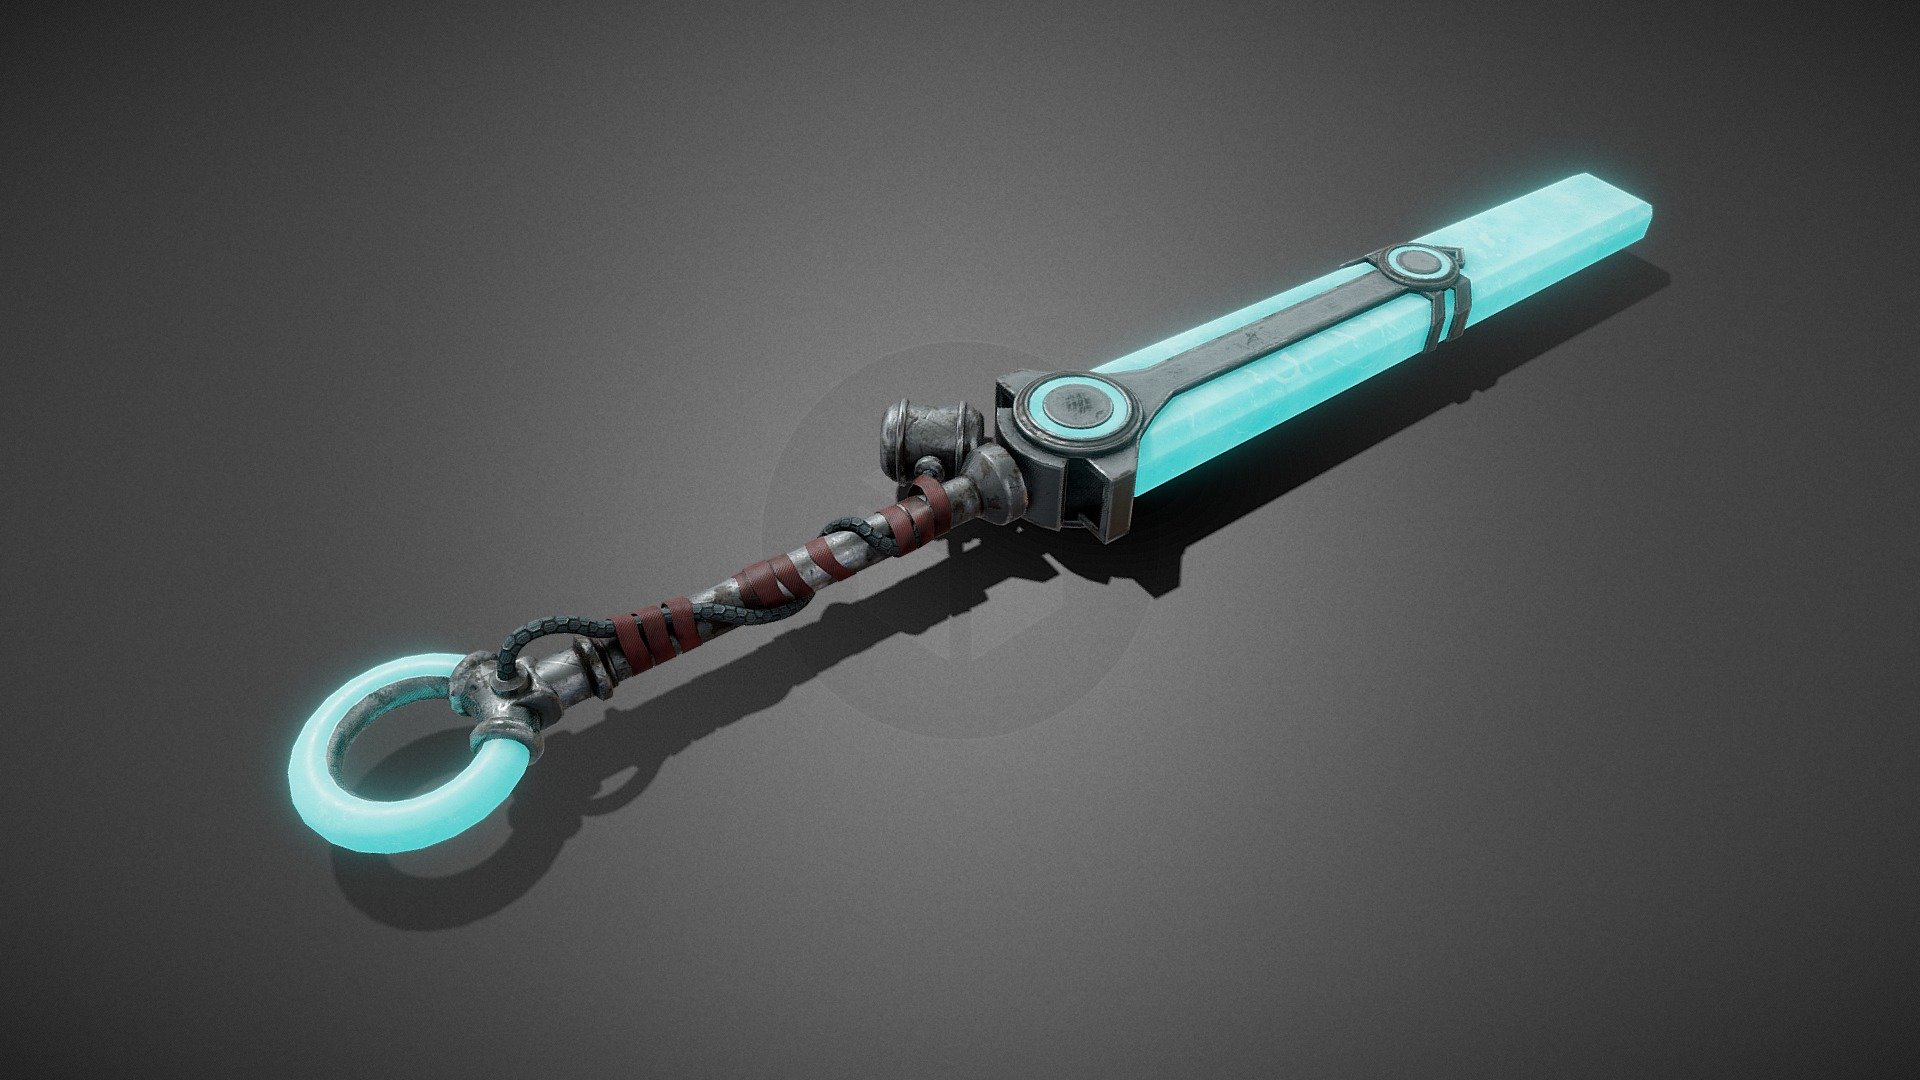 The technological sword of the character named Ekko from the League of Legends MOBA game. Low Poly Sword. Optimized for games (game ready). Suitable for close-UPS, illustrations and various renderings. Textures set in 4K 3d model